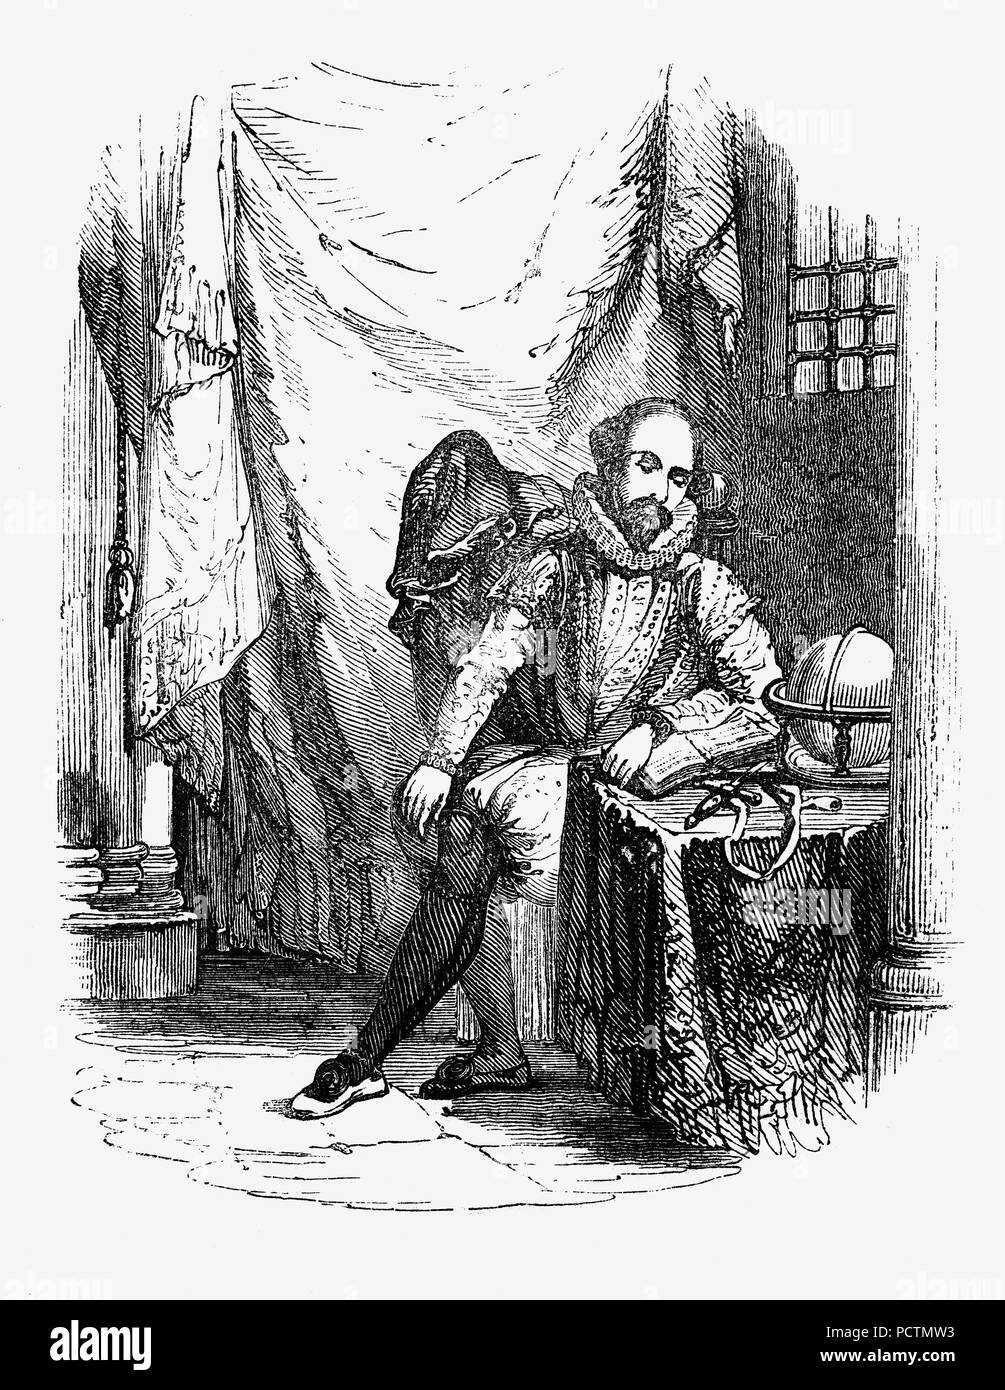 Sir Walter Raleigh (1554-1618) imprisoned in the Tower of London. He had become a favourite of Queen Elizabeth I until 1591, when he secretly married to Elizabeth 'Bess' Throckmorton, one of the Queen's ladies-in-waiting. When the unauthorised marriage was discovered the Queen ordered Raleigh to be imprisoned and Bess dismissed from court. Both were imprisoned in the Tower of London in June 1592. He was released from prison in August 1592 to manage a recently returned expedition and attack on the Spanish coast after which he was sent back to the Tower, but by early 1593 was released. Stock Photo